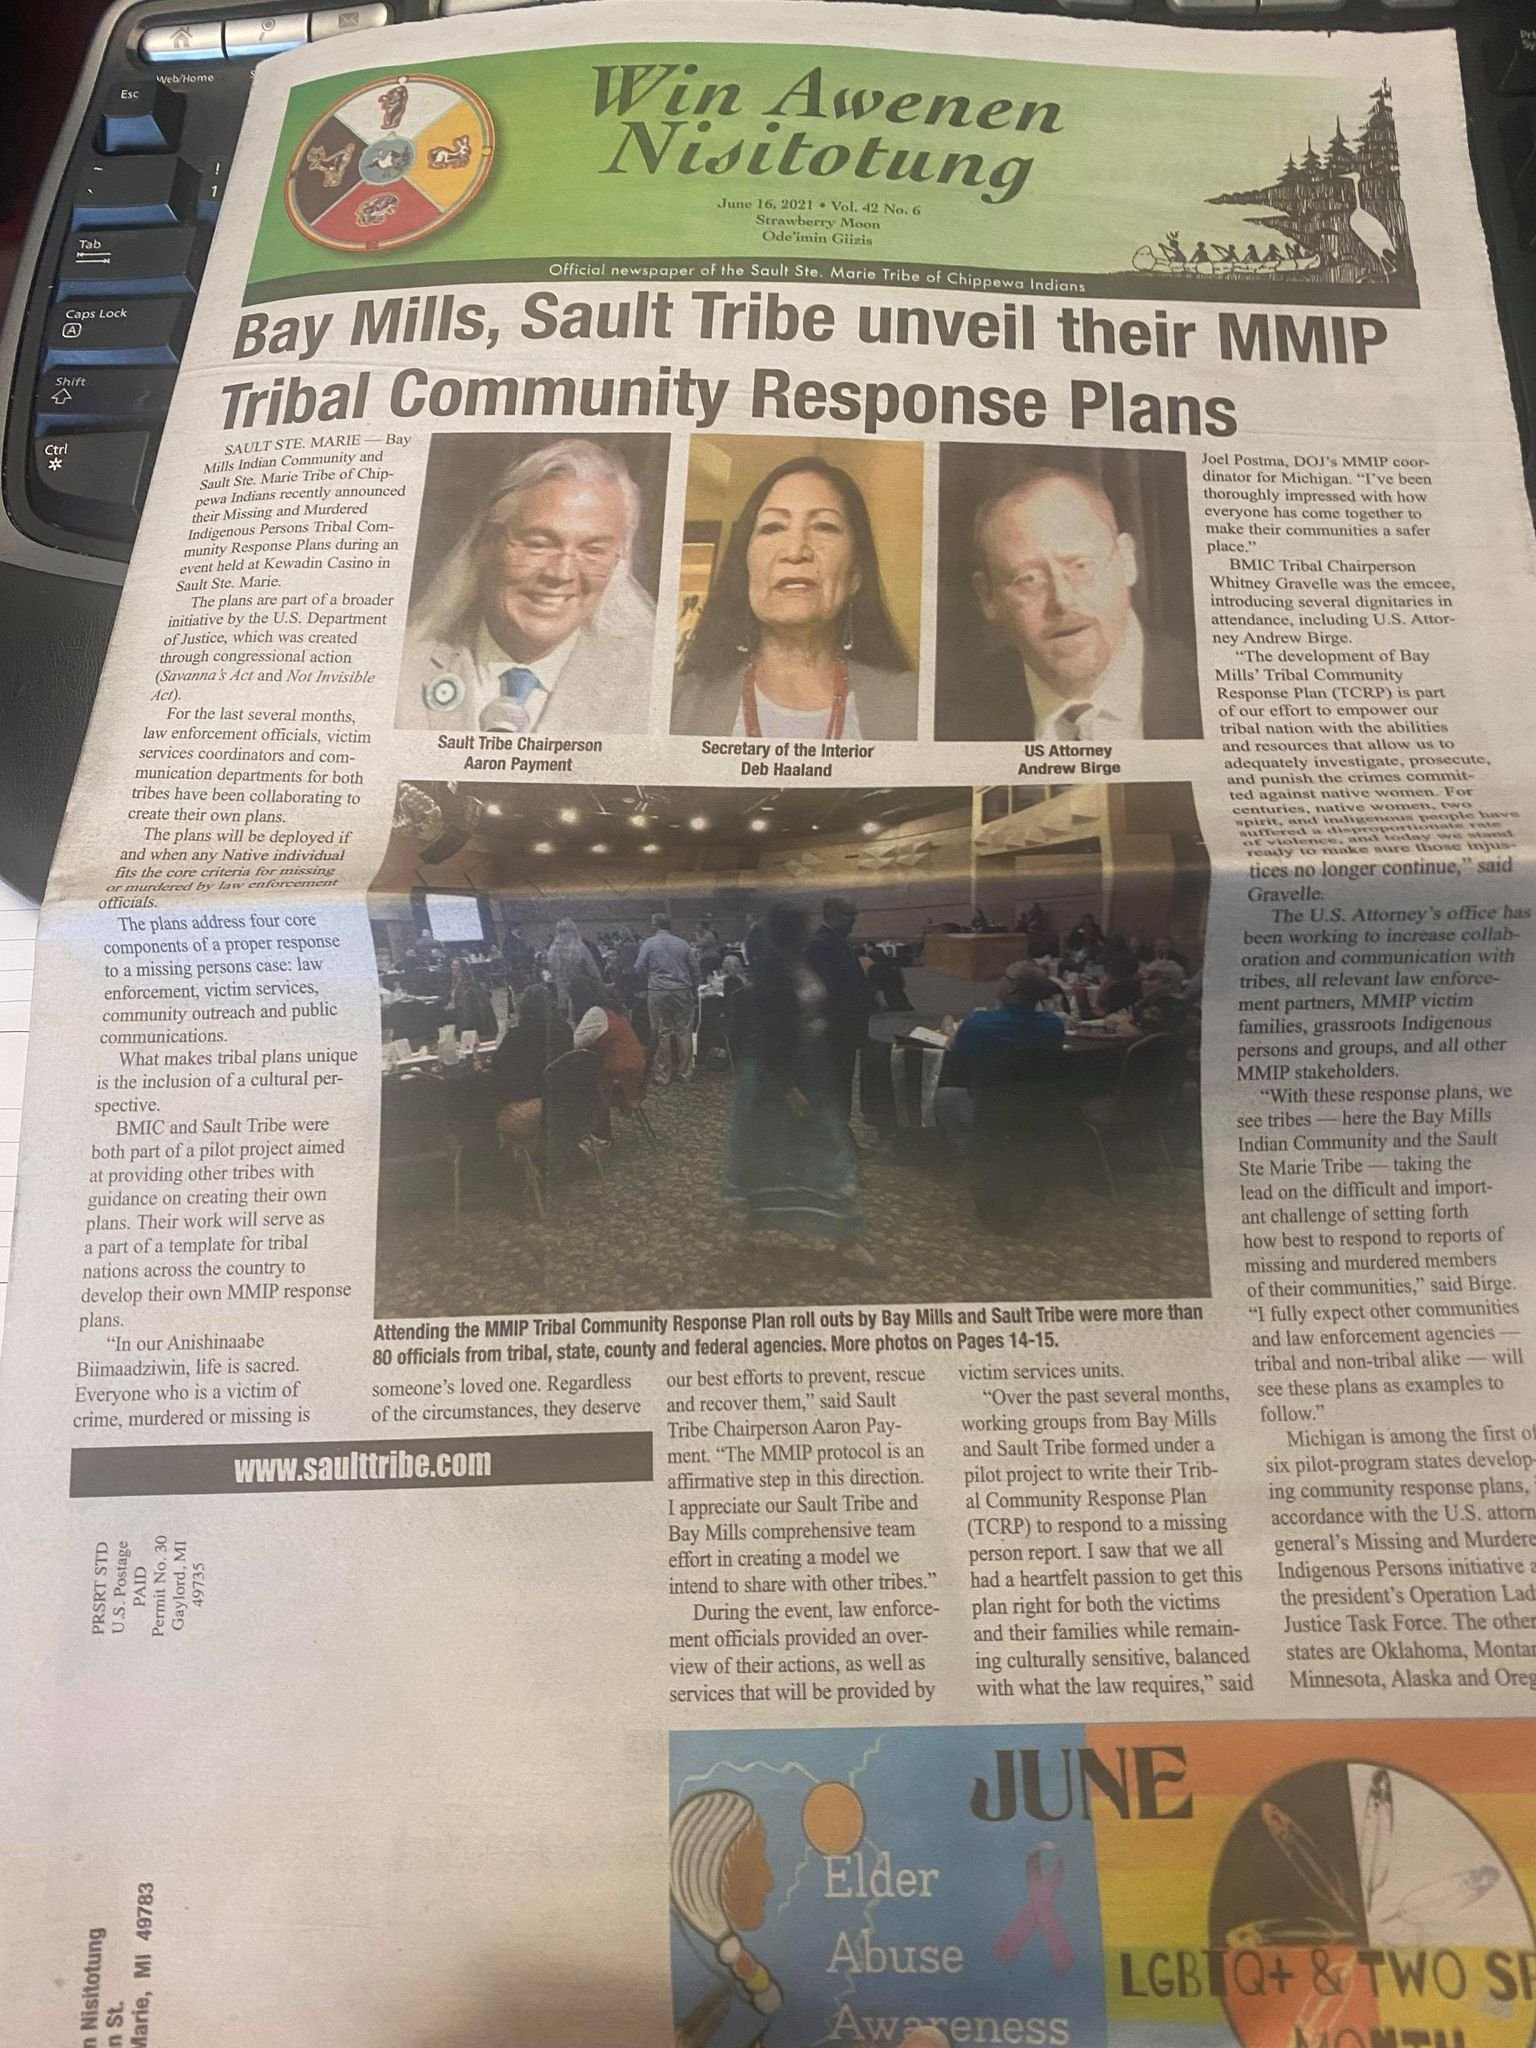 Tribal Community Response Plan makes front page!